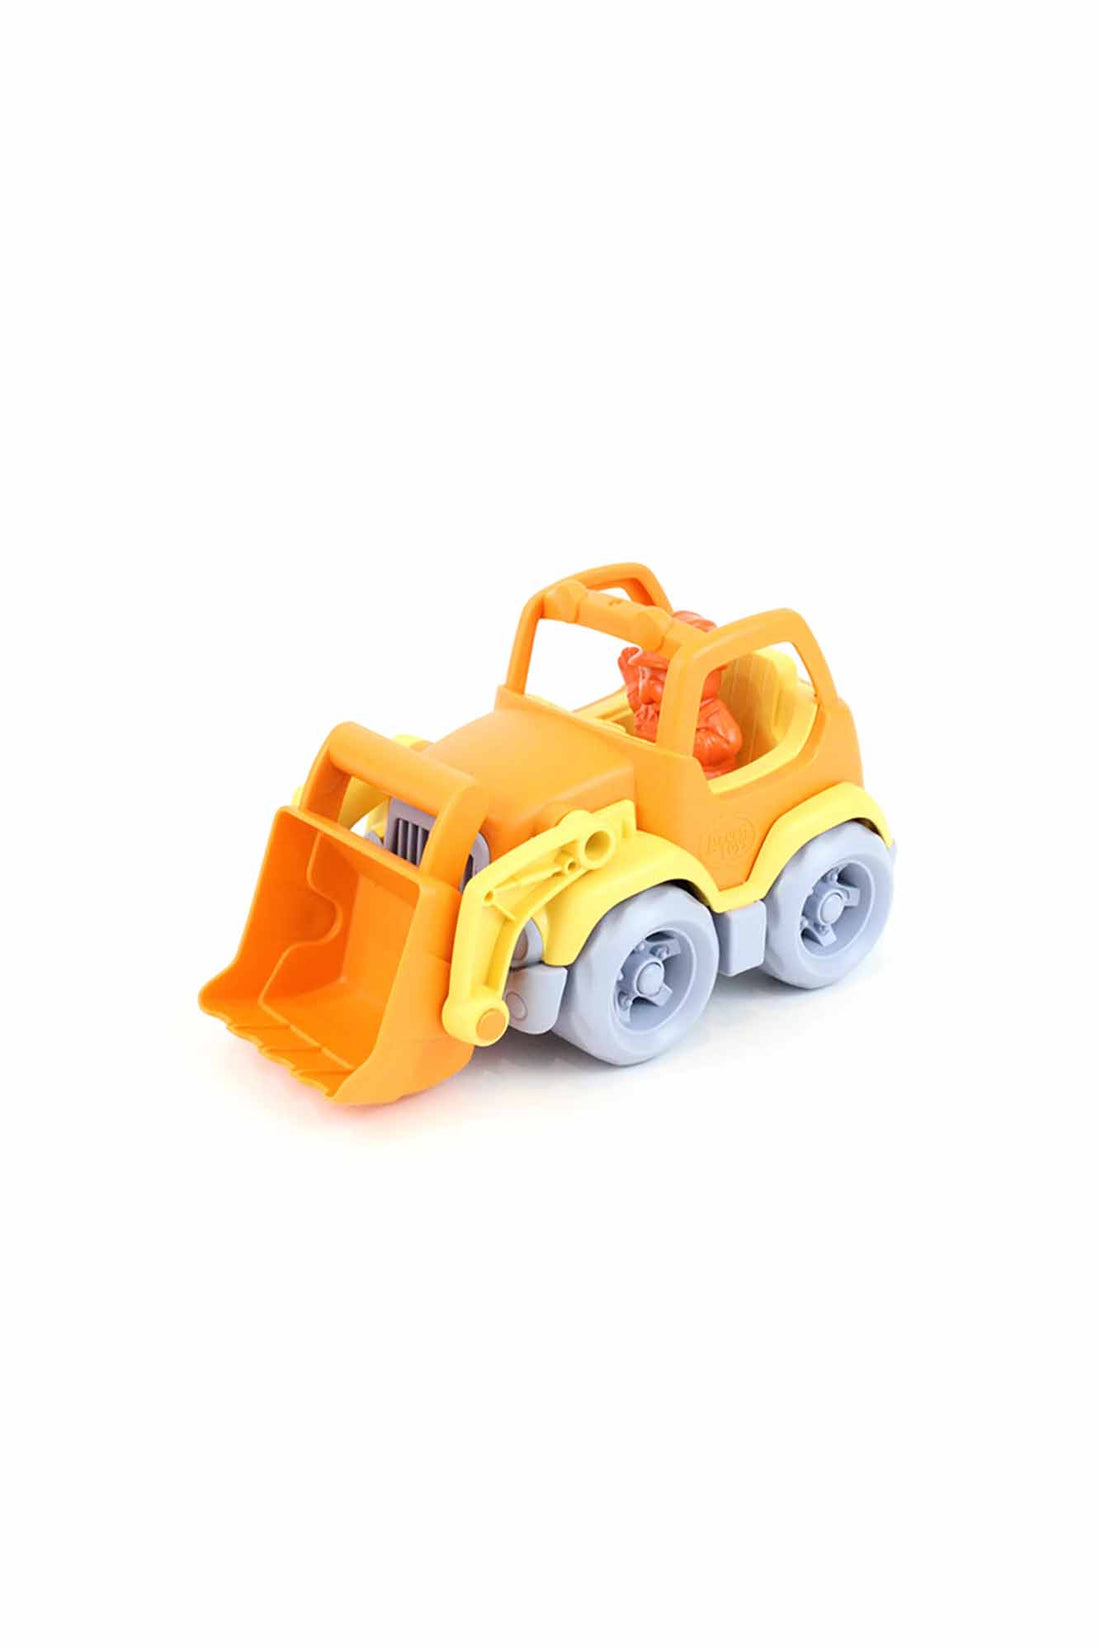 GREEN TOYS SCOOPER CONSTRUCTION TRUCK